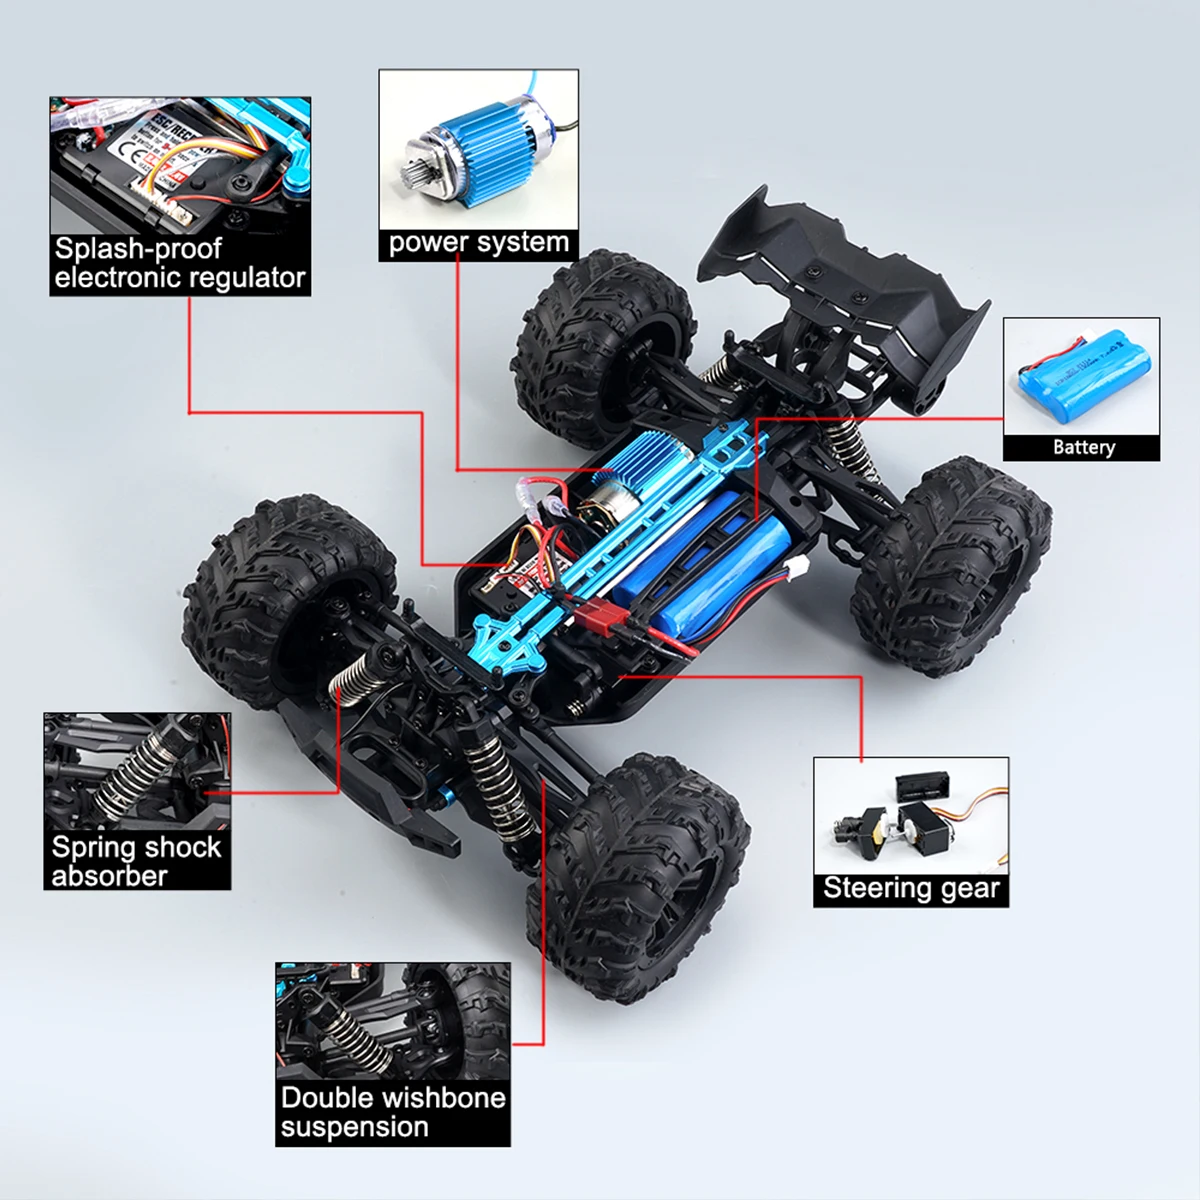 1:16 Scale 2.4G RC Car High Speed Remote Control Off Road Car 4WD 38km/h Truck w/ LED Headlamps Rc carros Model Toys child Gifts enlarge